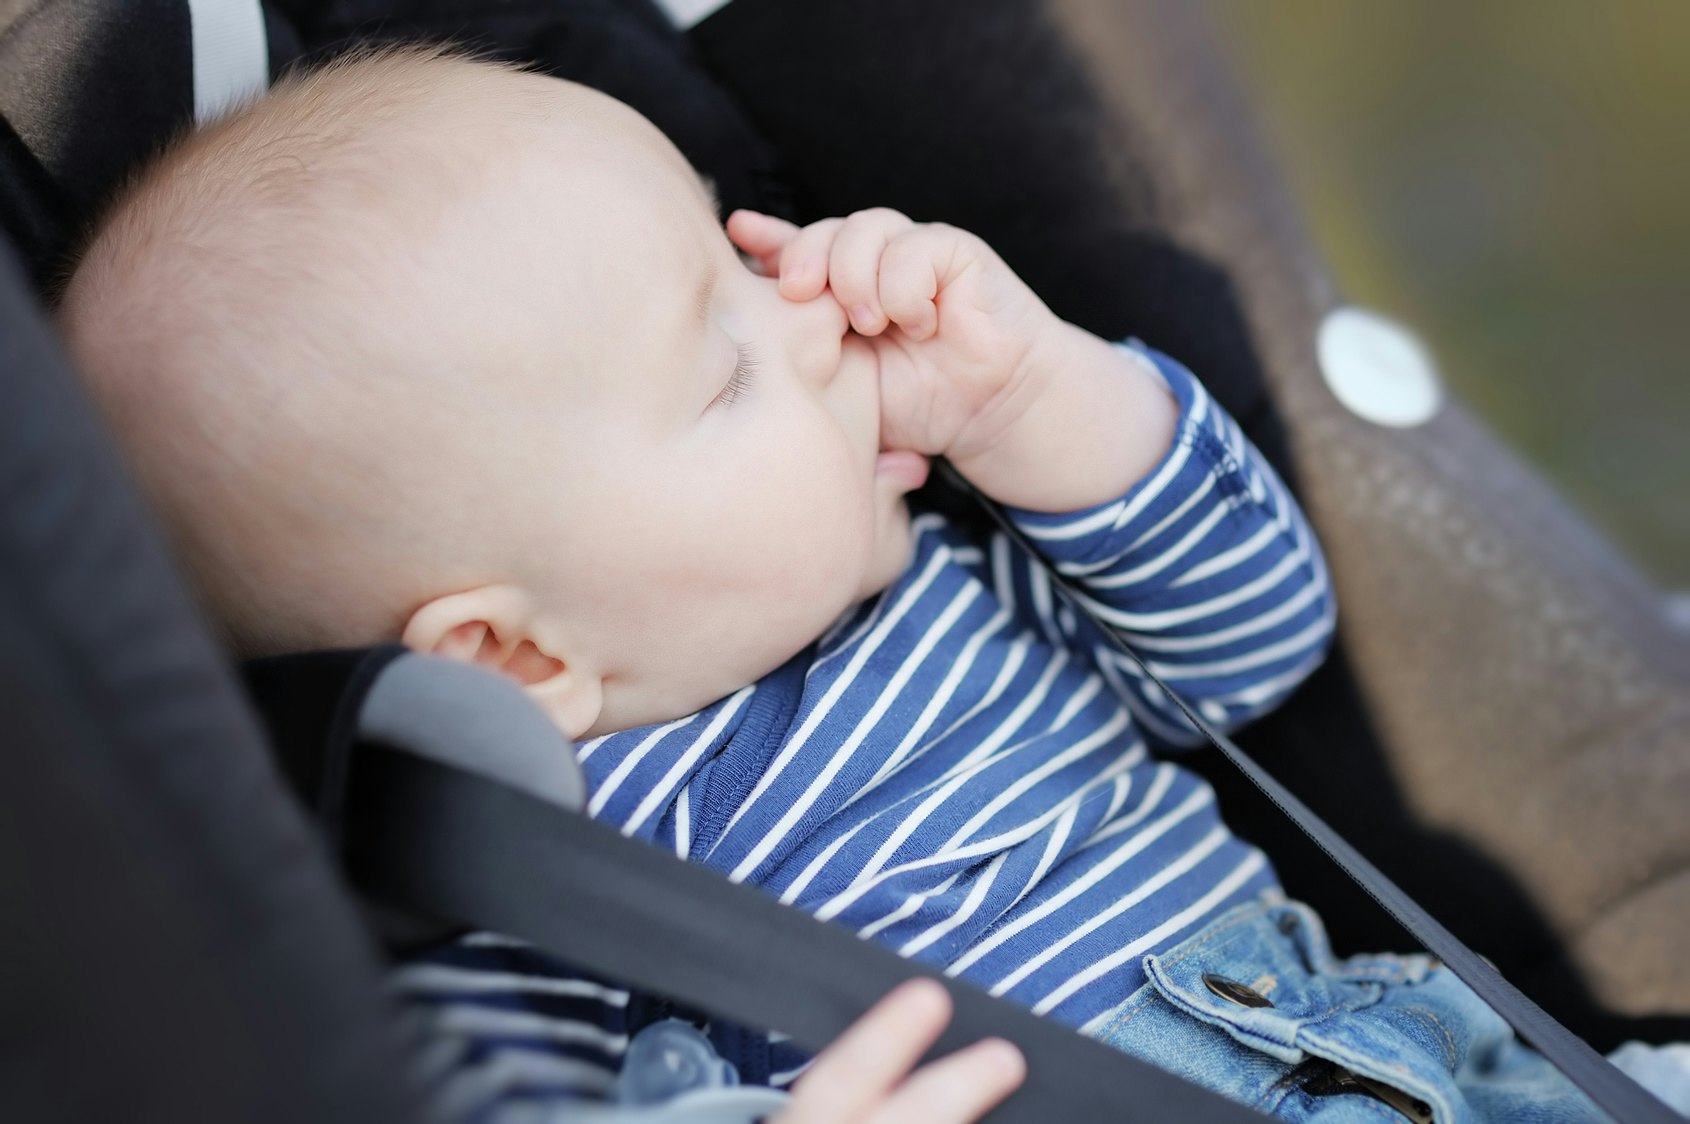 baby putting hands in mouth and vomiting